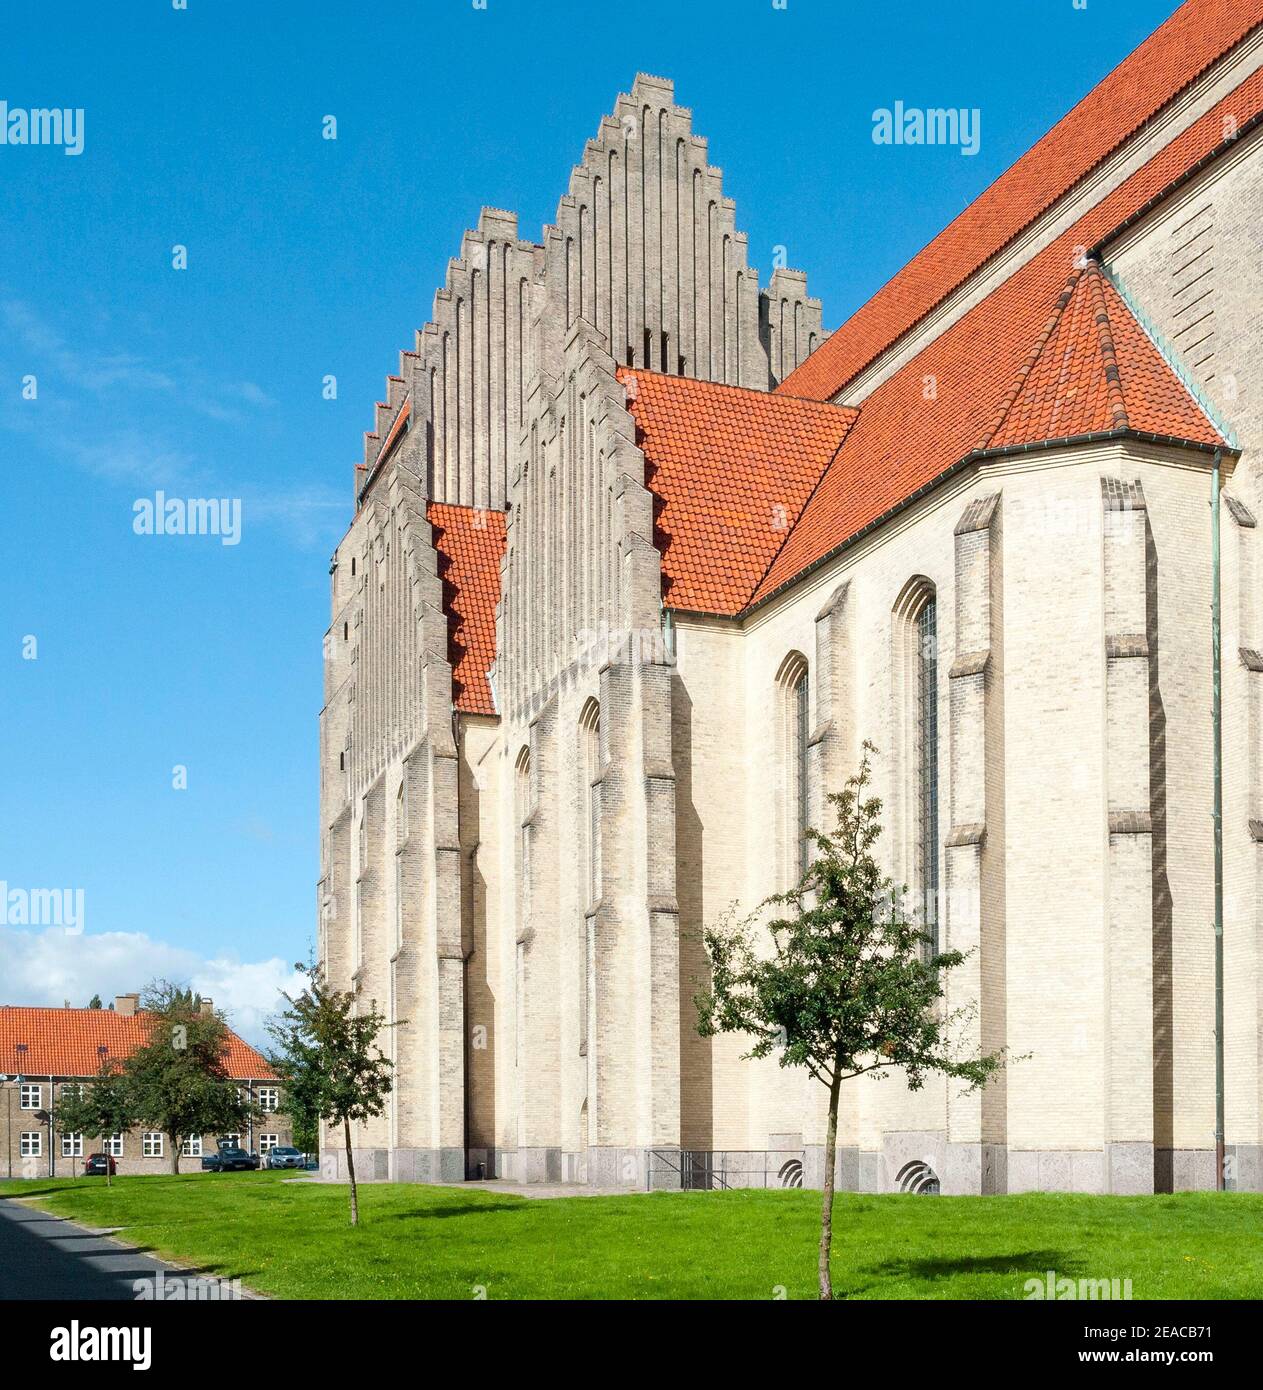 Denmark, Zealand island = Sjaelland, Copenhagen, Grundtvigskirche, exterior from the southeast, in the Copenhagen district of Bispebjerg. Three-aisled hall church with space for 1, 800 people, architects Peder Jensen-Klint und Sohn, expressionism with neo-Gothic style elements, built 1921-1940. Stock Photo